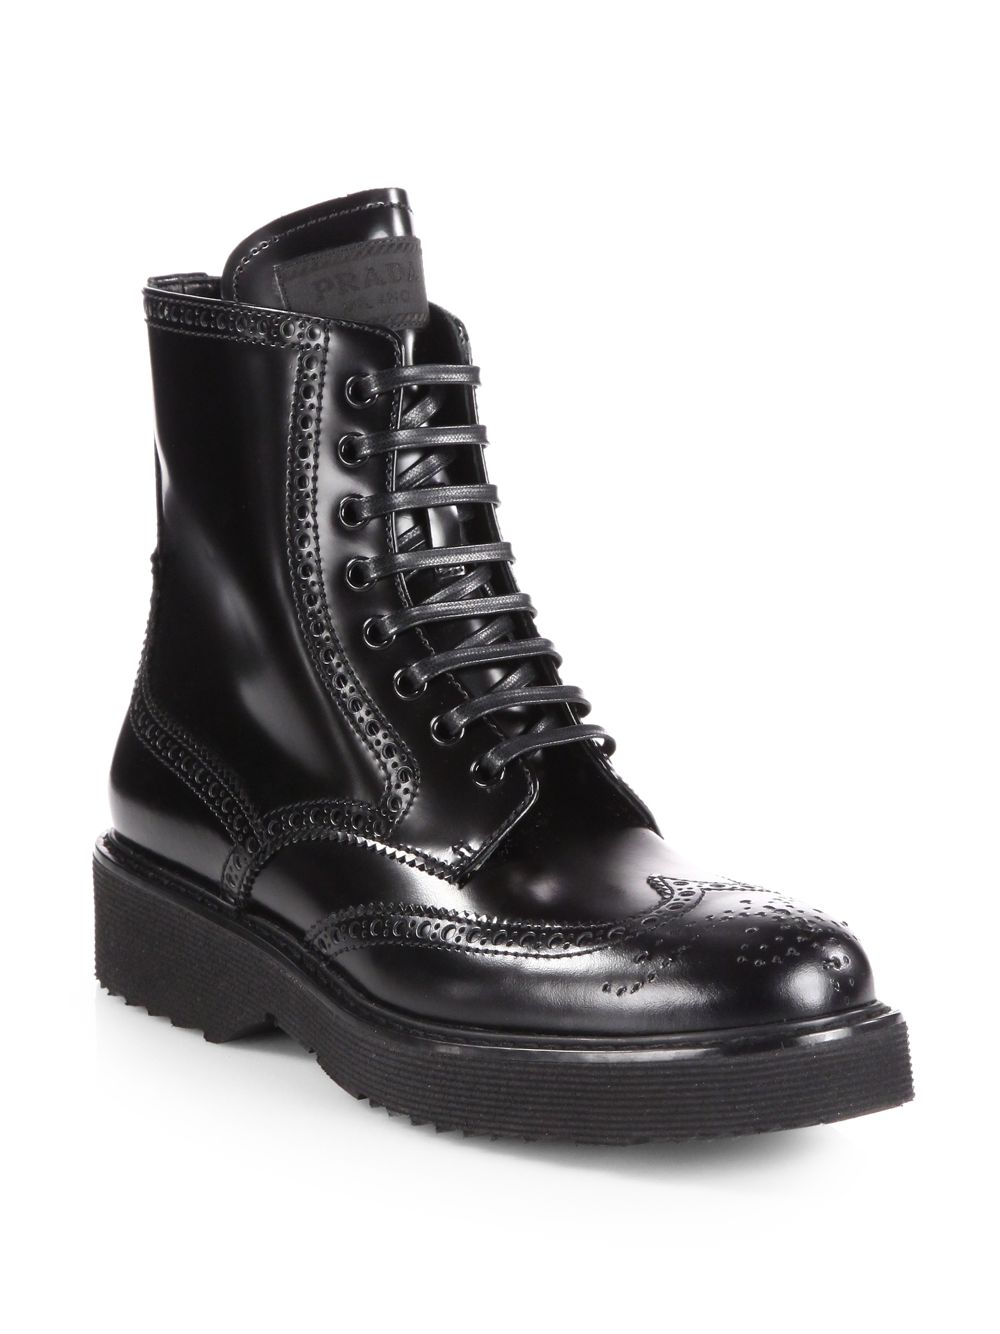 Prada Leather Wingtip Lace-Up Ankle Boots in Black | Lyst